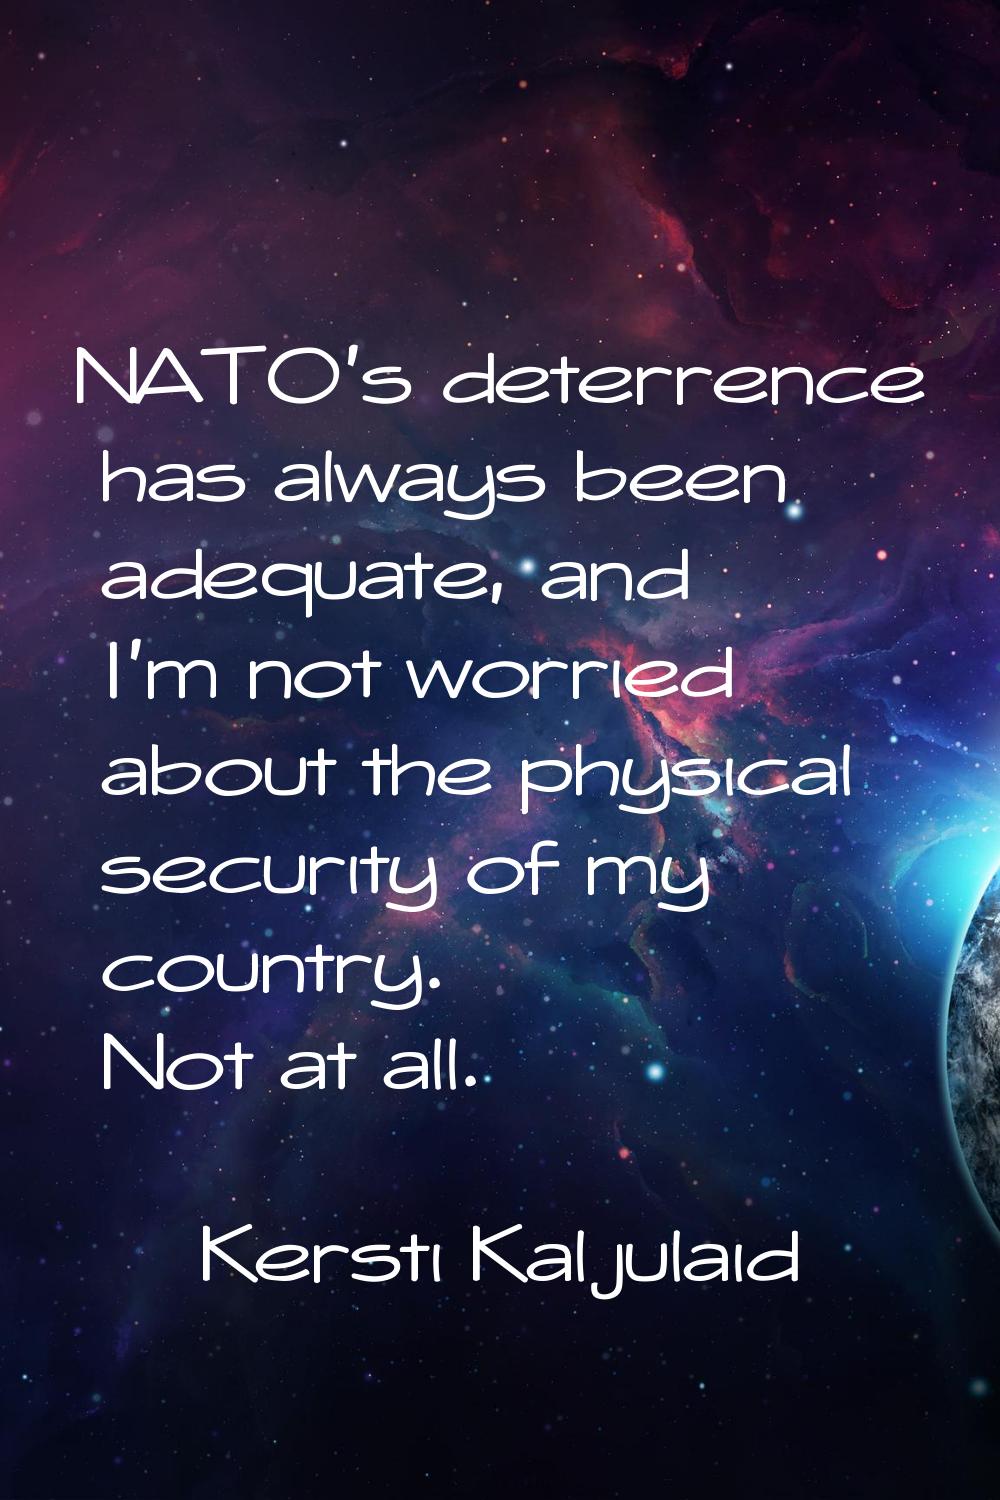 NATO's deterrence has always been adequate, and I'm not worried about the physical security of my c